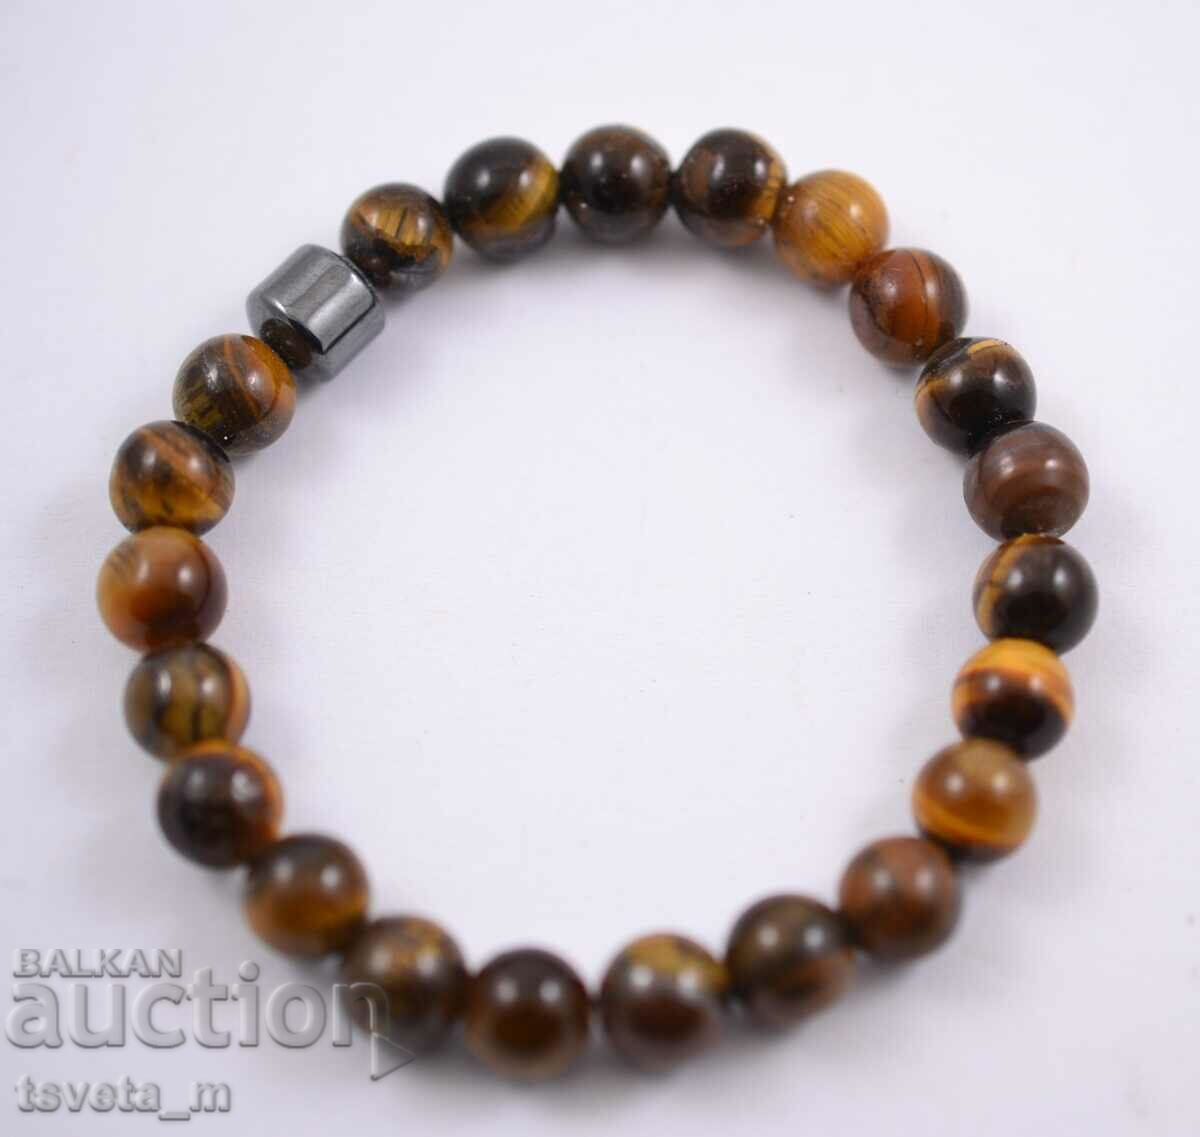 Bracelet with natural stones on a rubber band